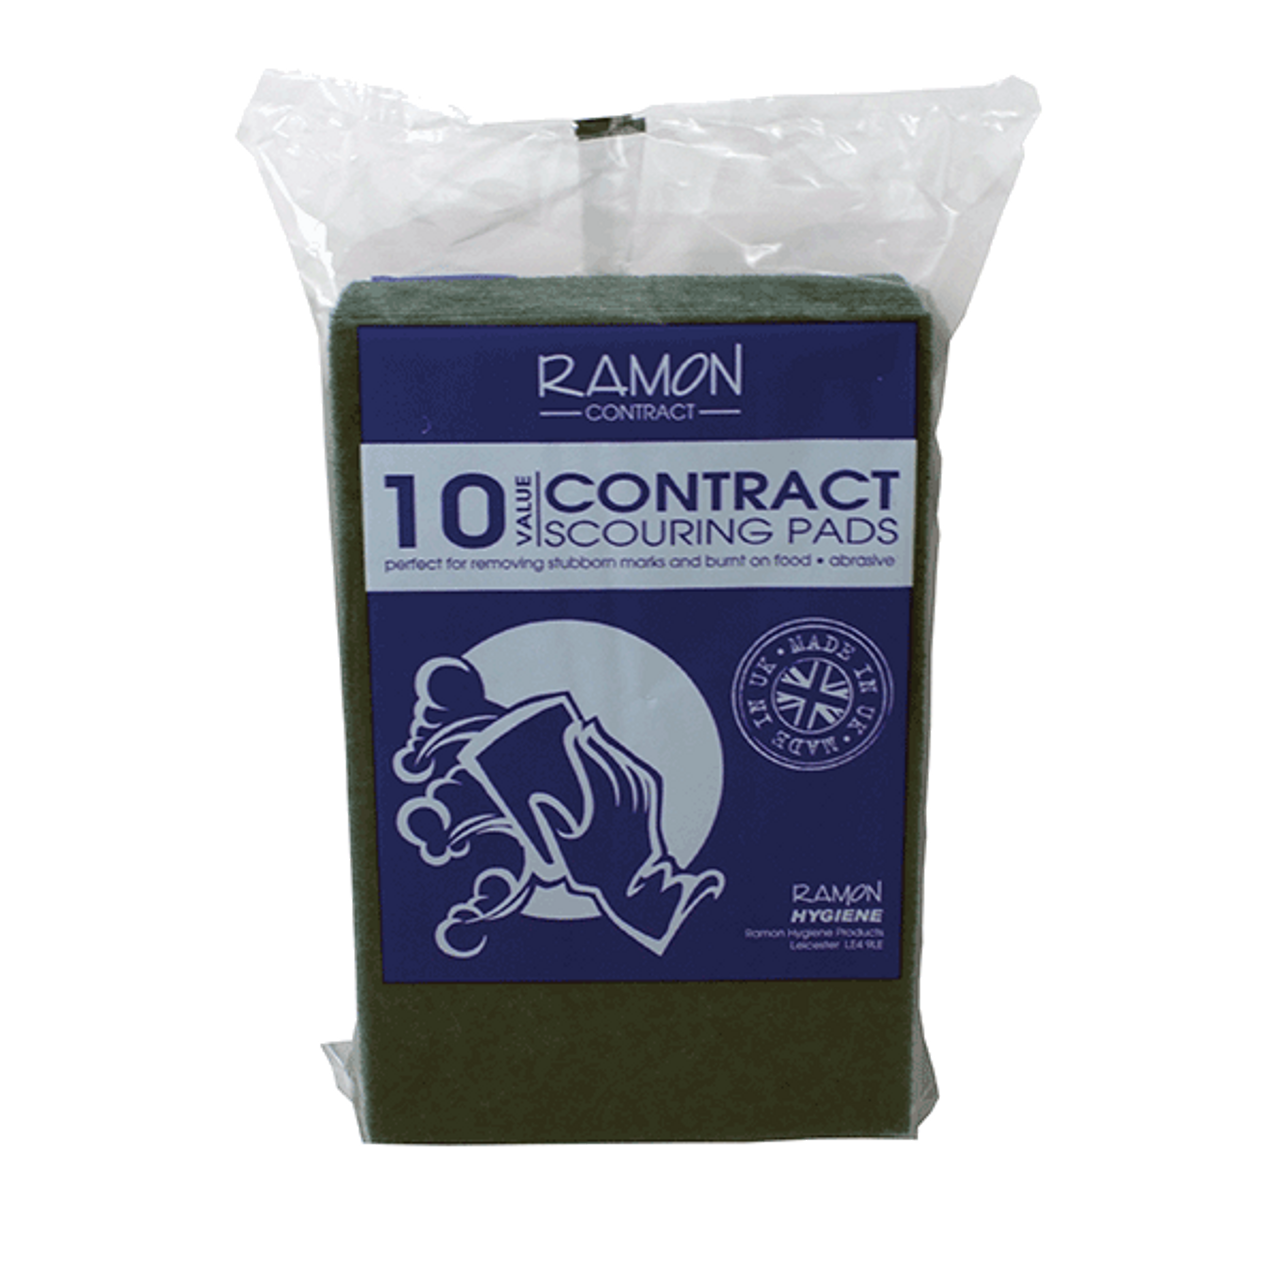 Ramon ‘Contract’ 10 Scouring Pads